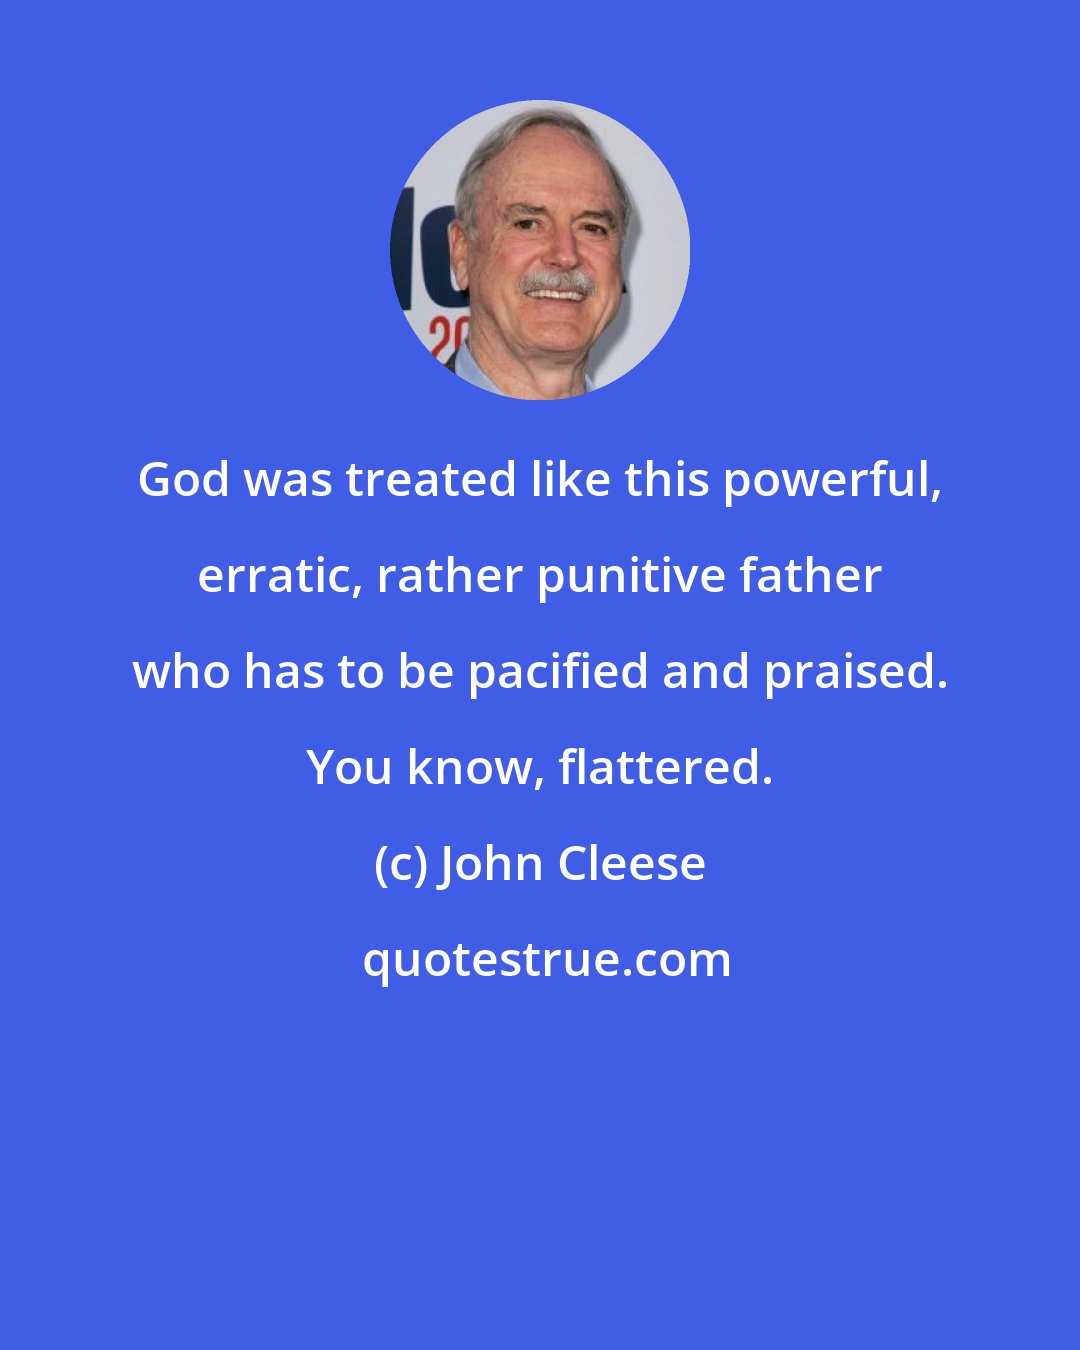 John Cleese: God was treated like this powerful, erratic, rather punitive father who has to be pacified and praised. You know, flattered.